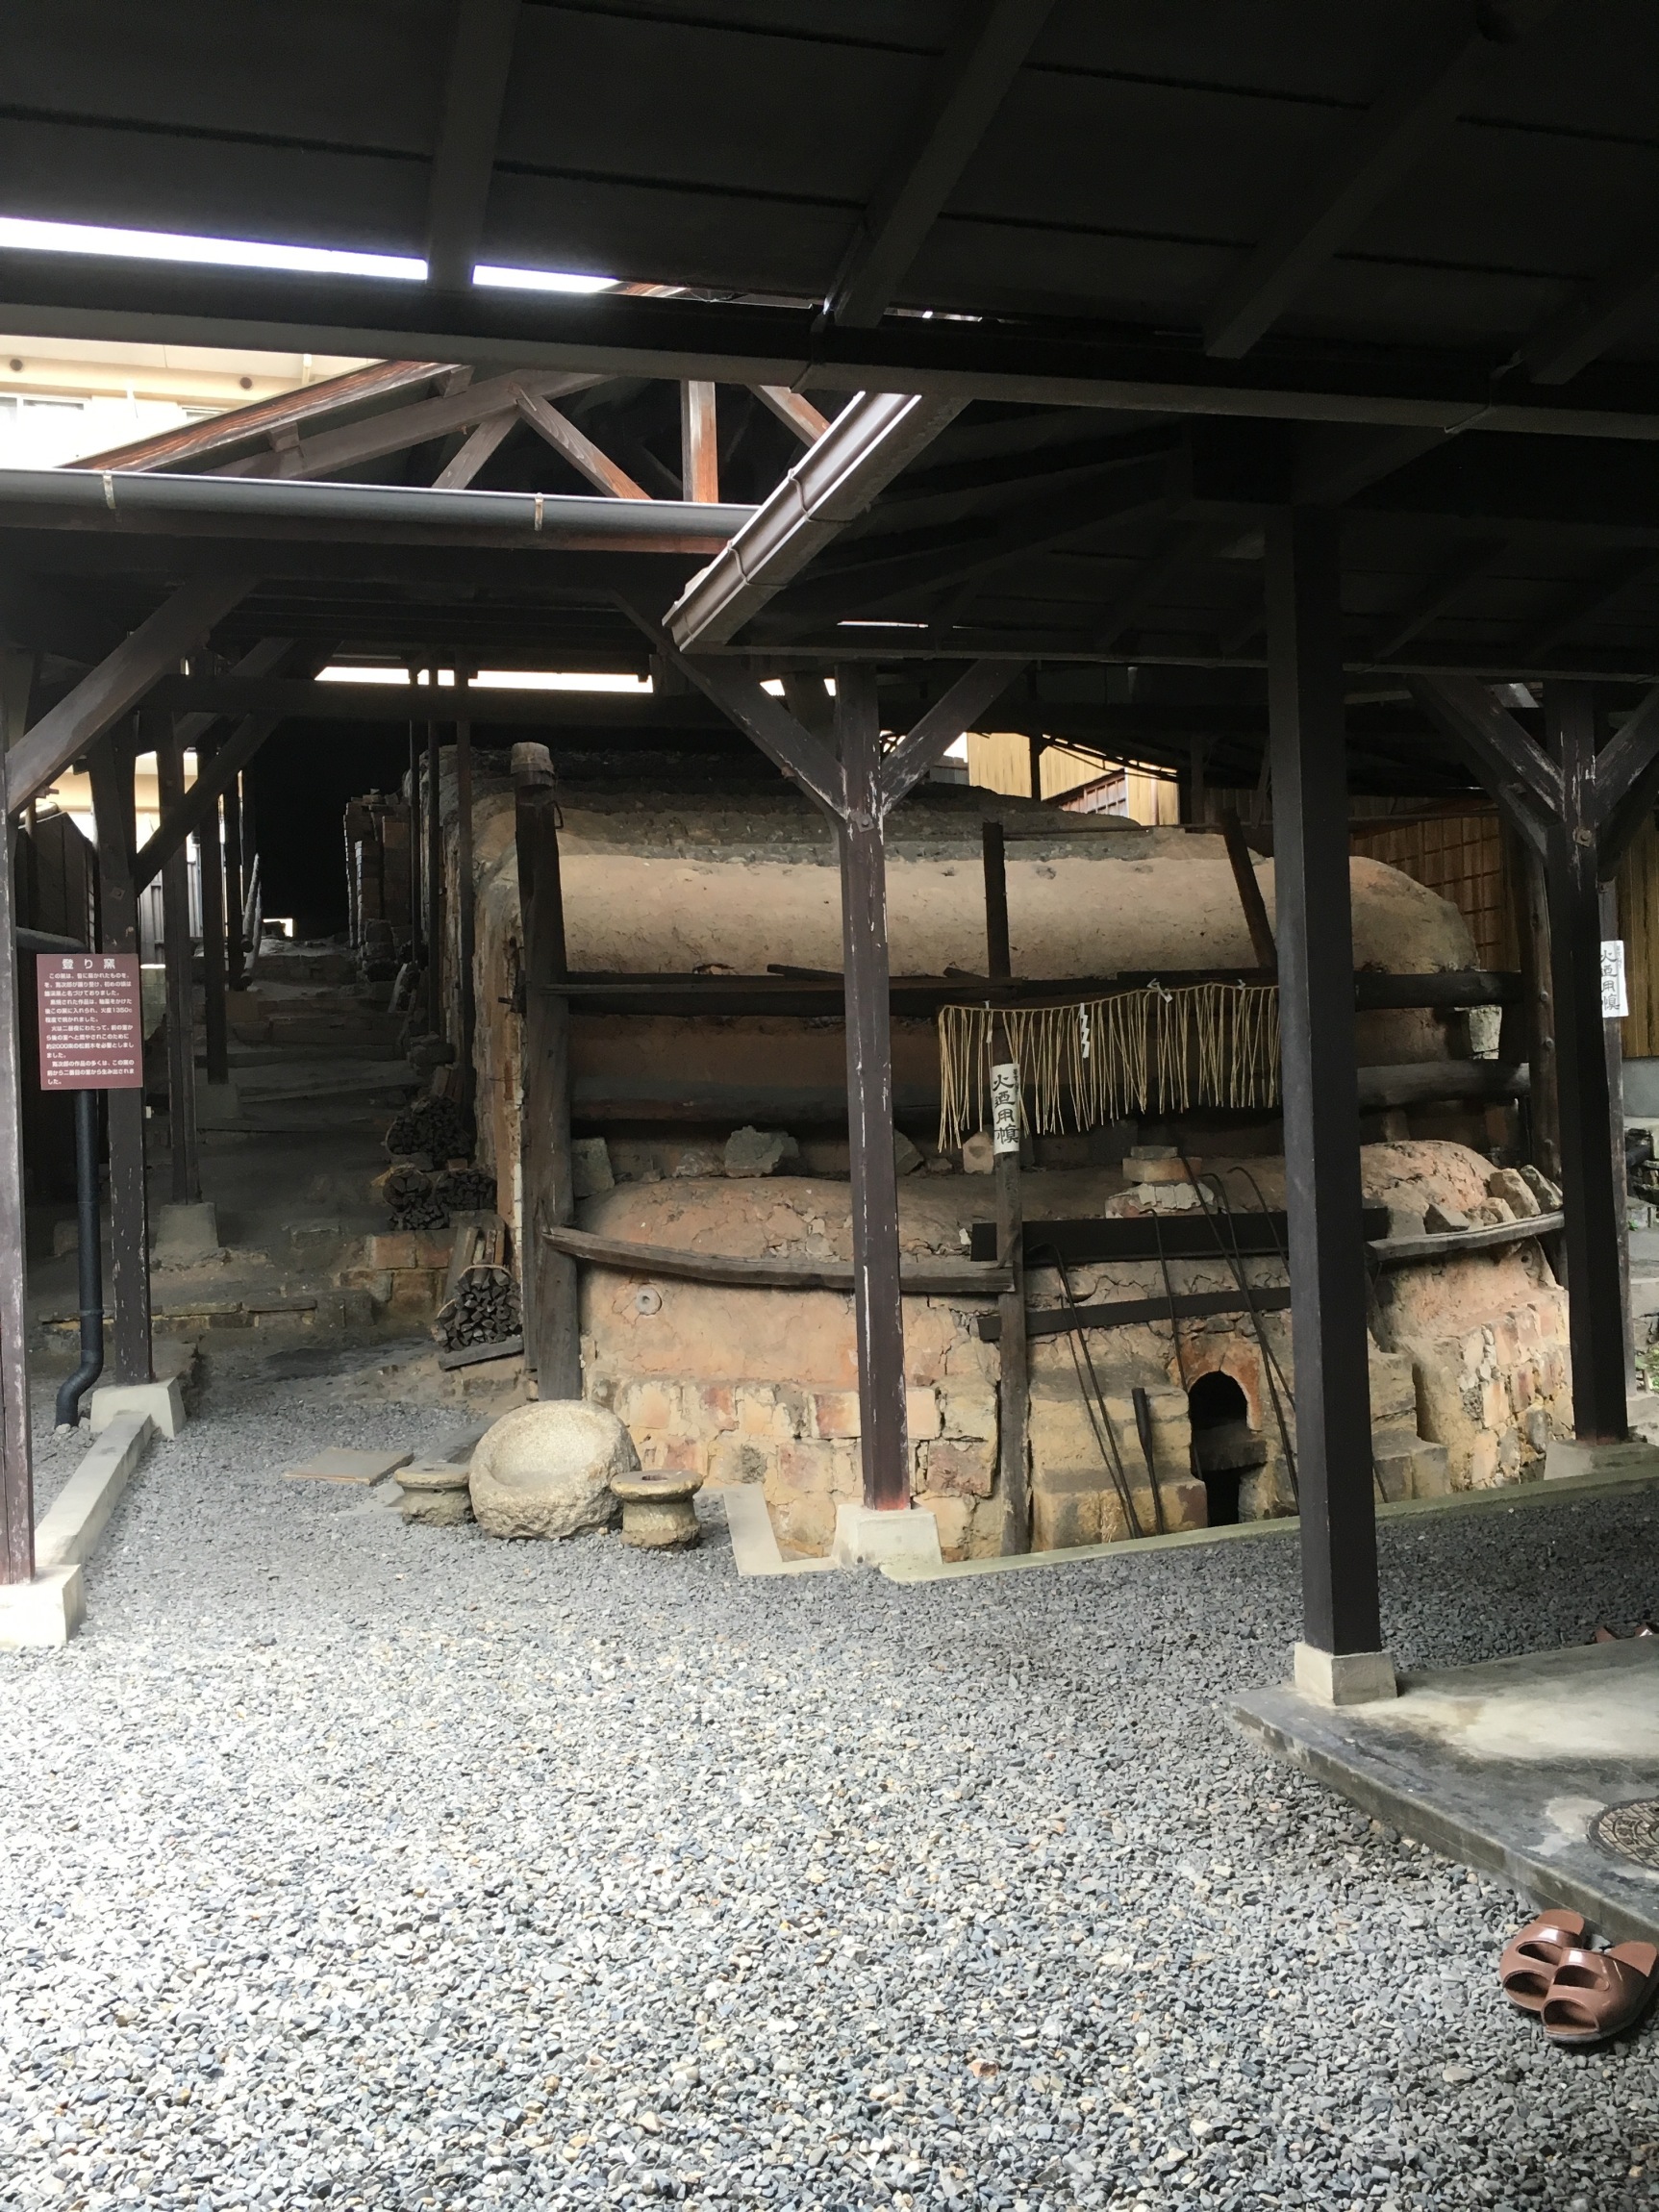 Also seen at the Kawai Kanjiro Museum was this multi-chambered Noborigama kiln, last fired up in 1971. The piles of wood used for the kiln can be seen along the side. This would have only been a small proportion of the amount used to get the kiln up to 1200 degrees celsius. I would love to see one in action one day.